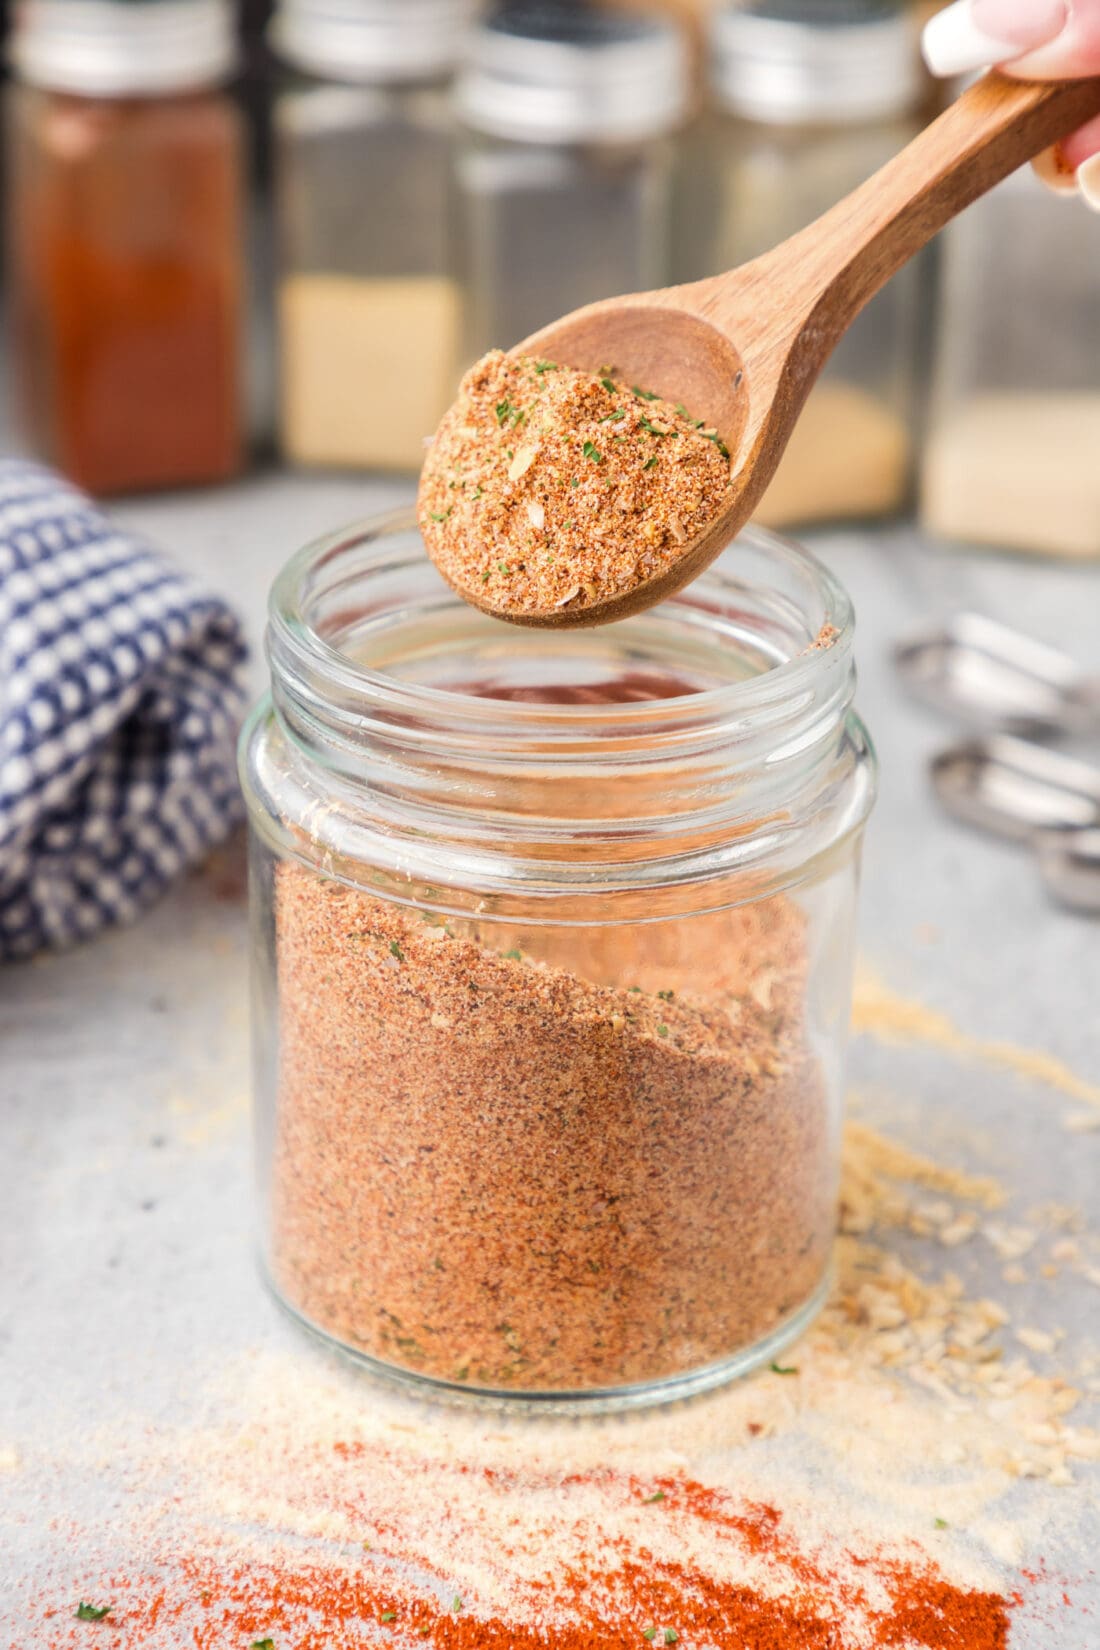 Spoonful of All Purpose Seasoning being lifted out of a jar of All Purpose Seasoning